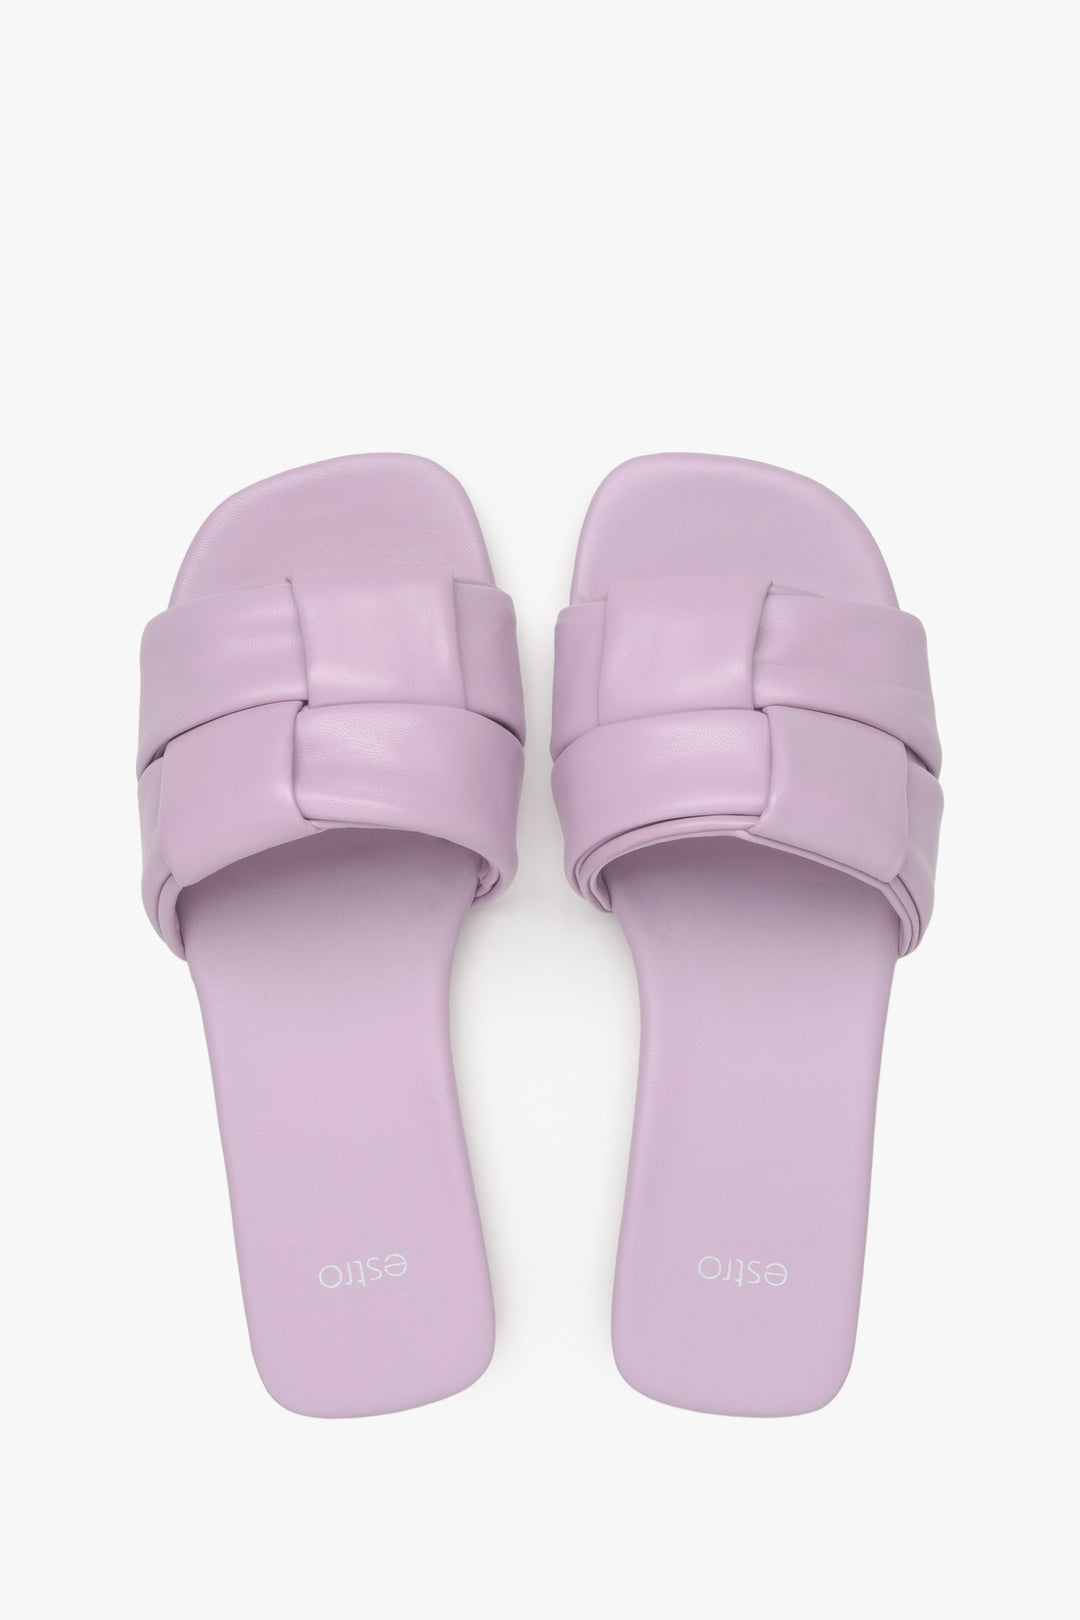 Slide Sandals for Women made of Lilac Patch Leather